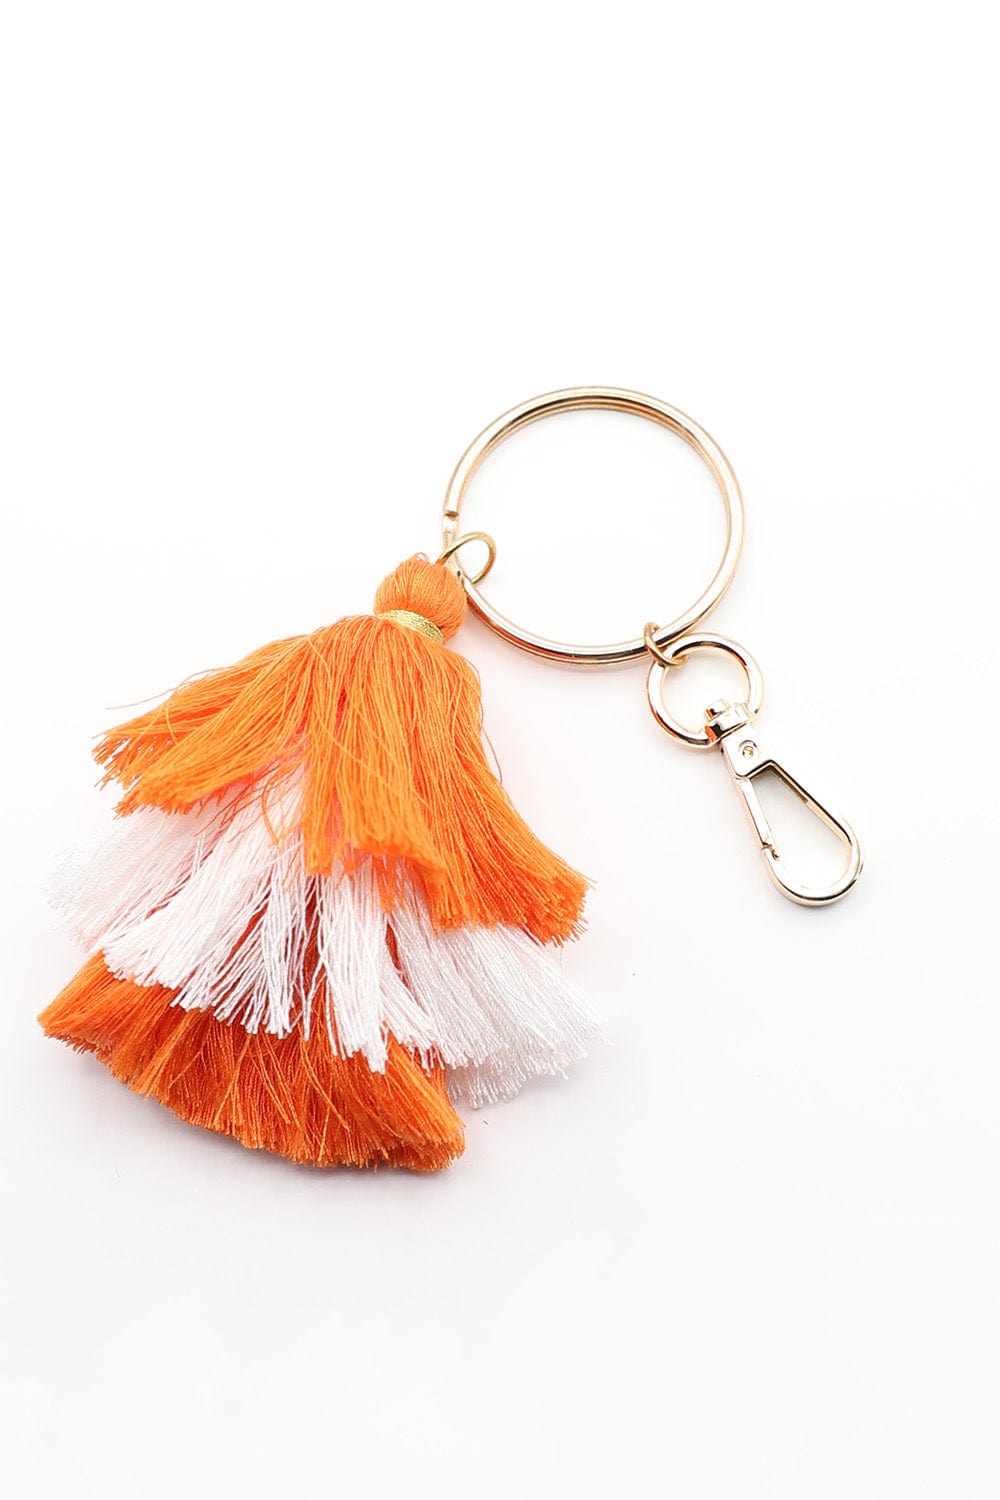 Orange and White Tassel Keychain on Large Ring with Hook